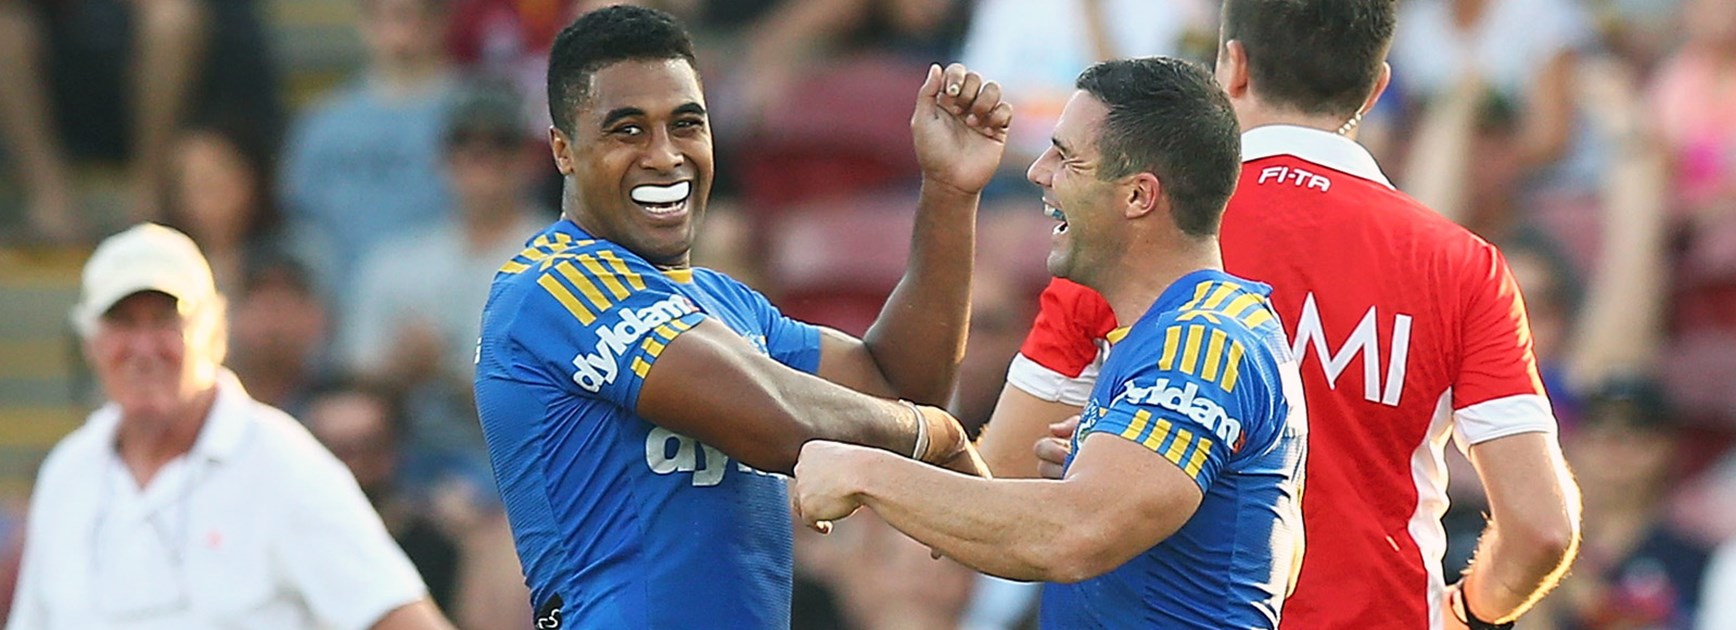 Michael Jennings and Michael Gordon celebrate during the Eels' Round 14 win over the Titans.